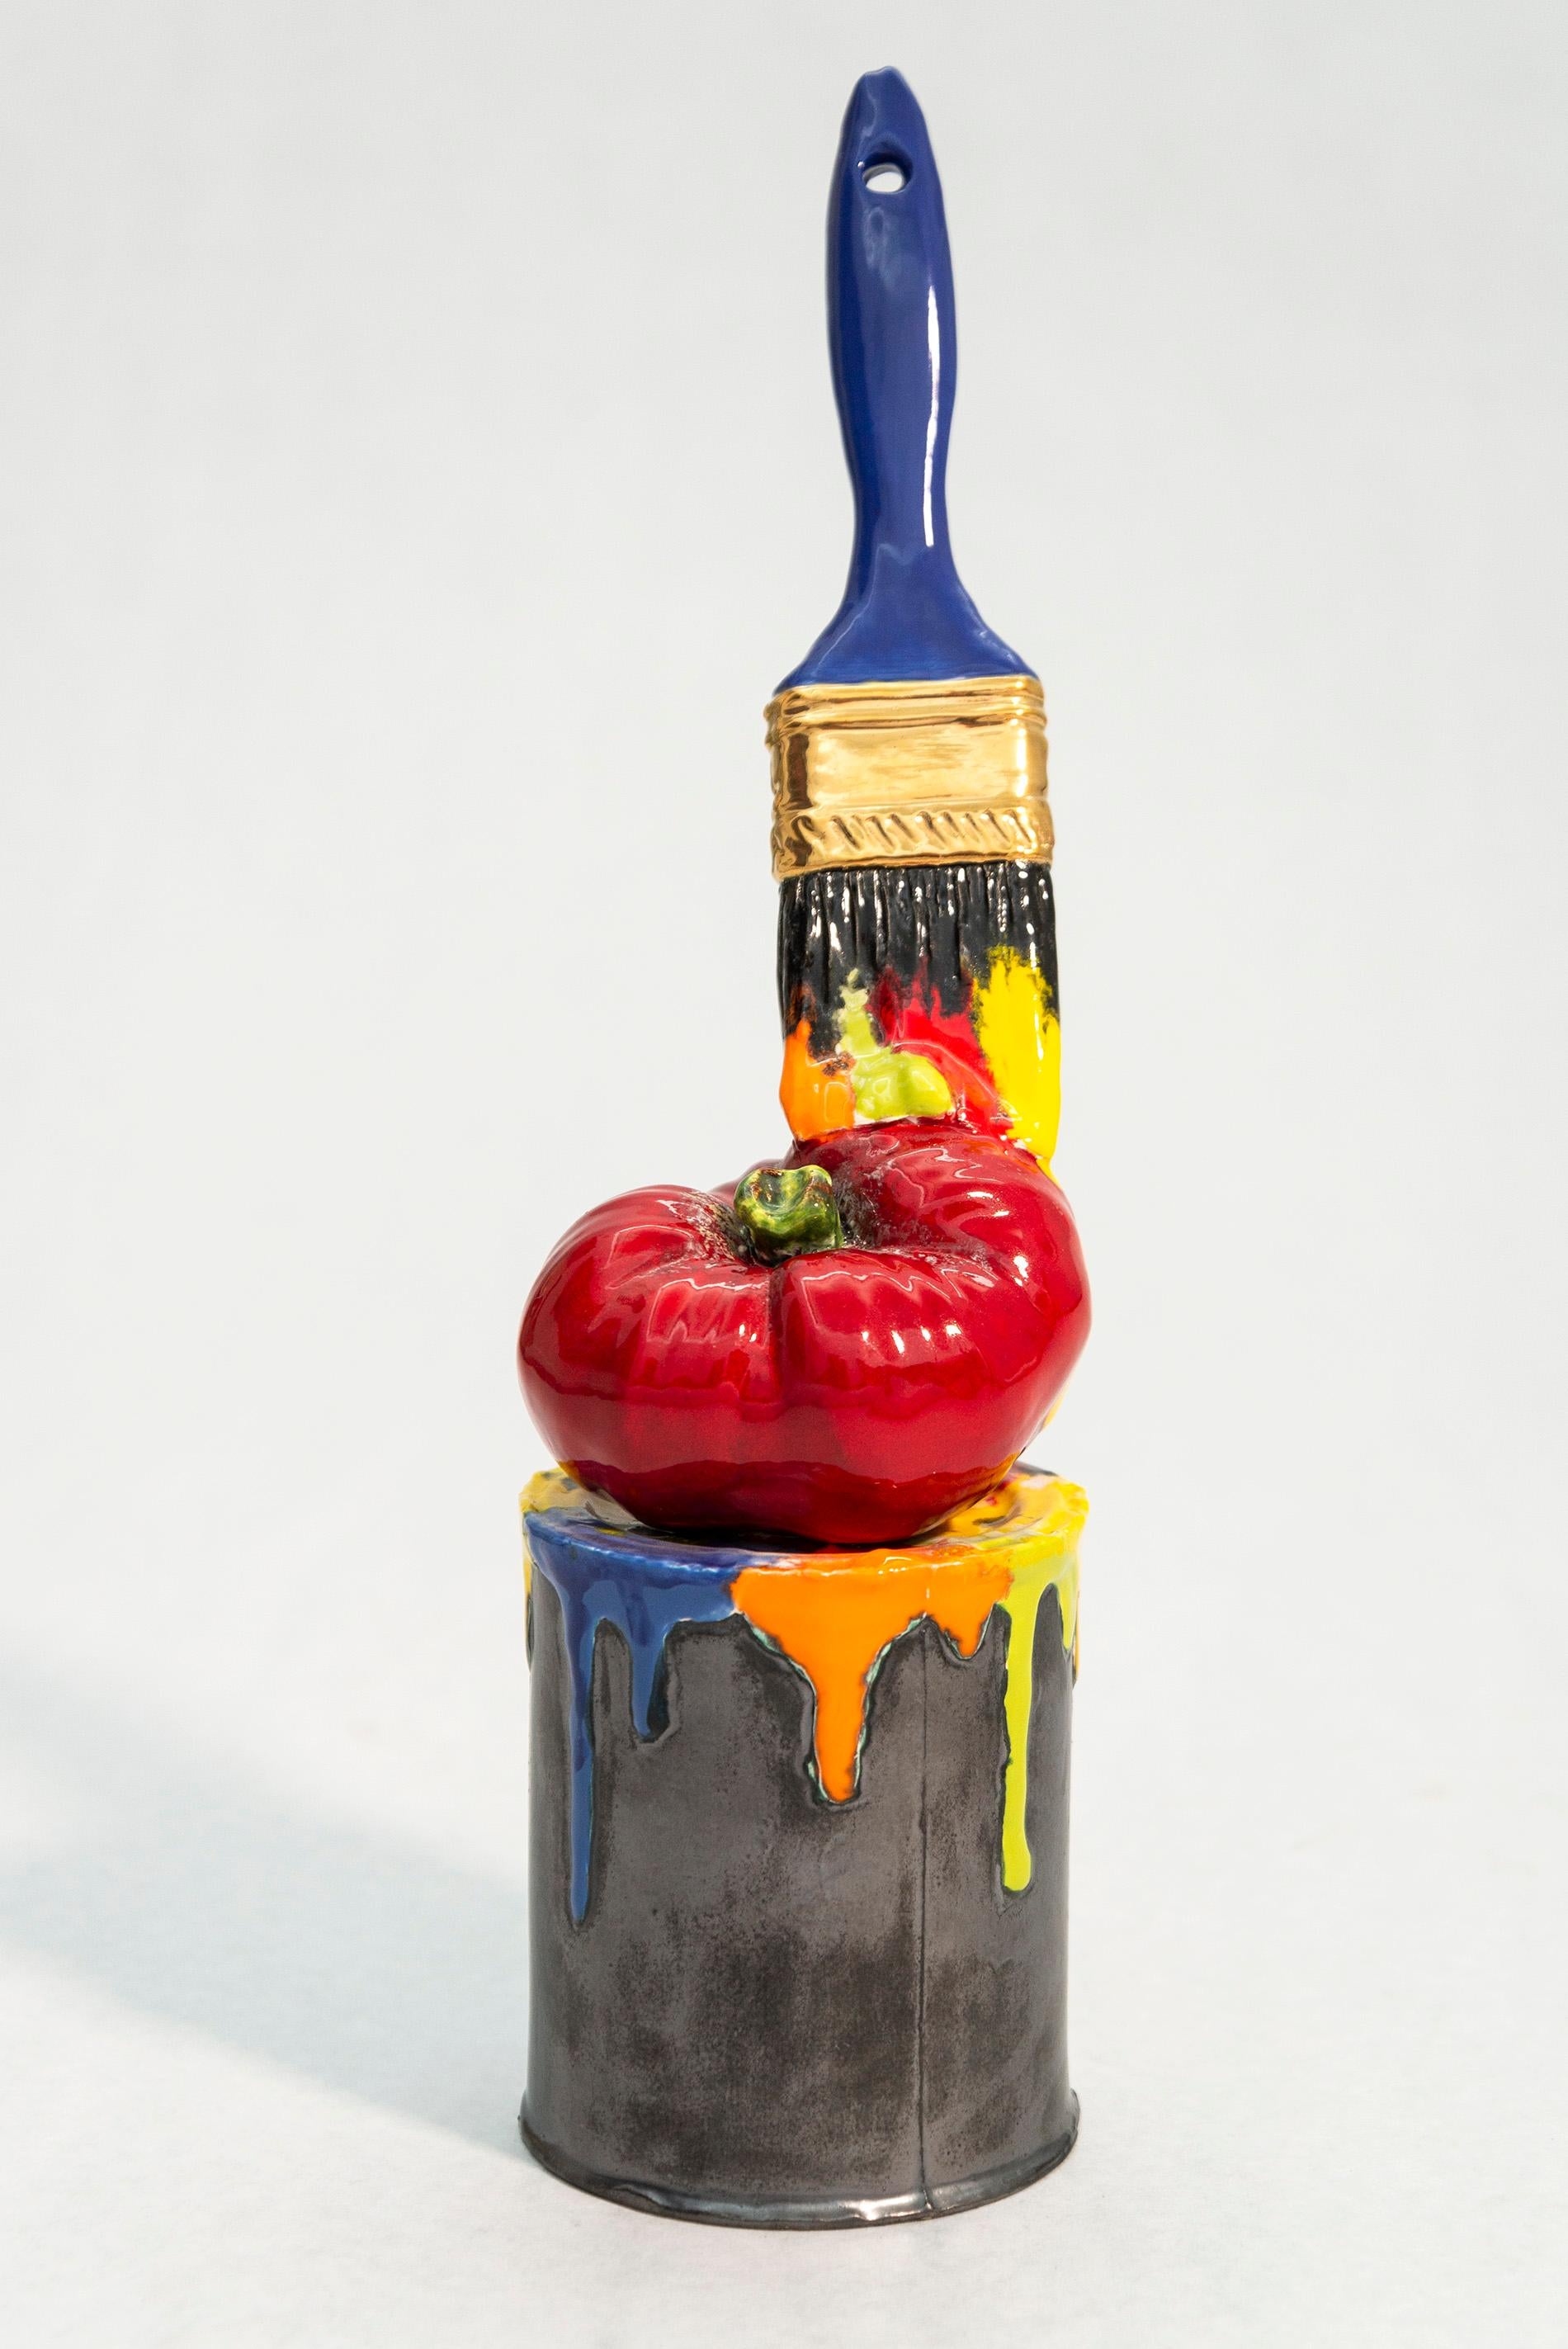 Victor Cicansky Still-Life Sculpture - Ceramic Can of Paint and Brush - colorful, realist, still-life ceramic sculpture